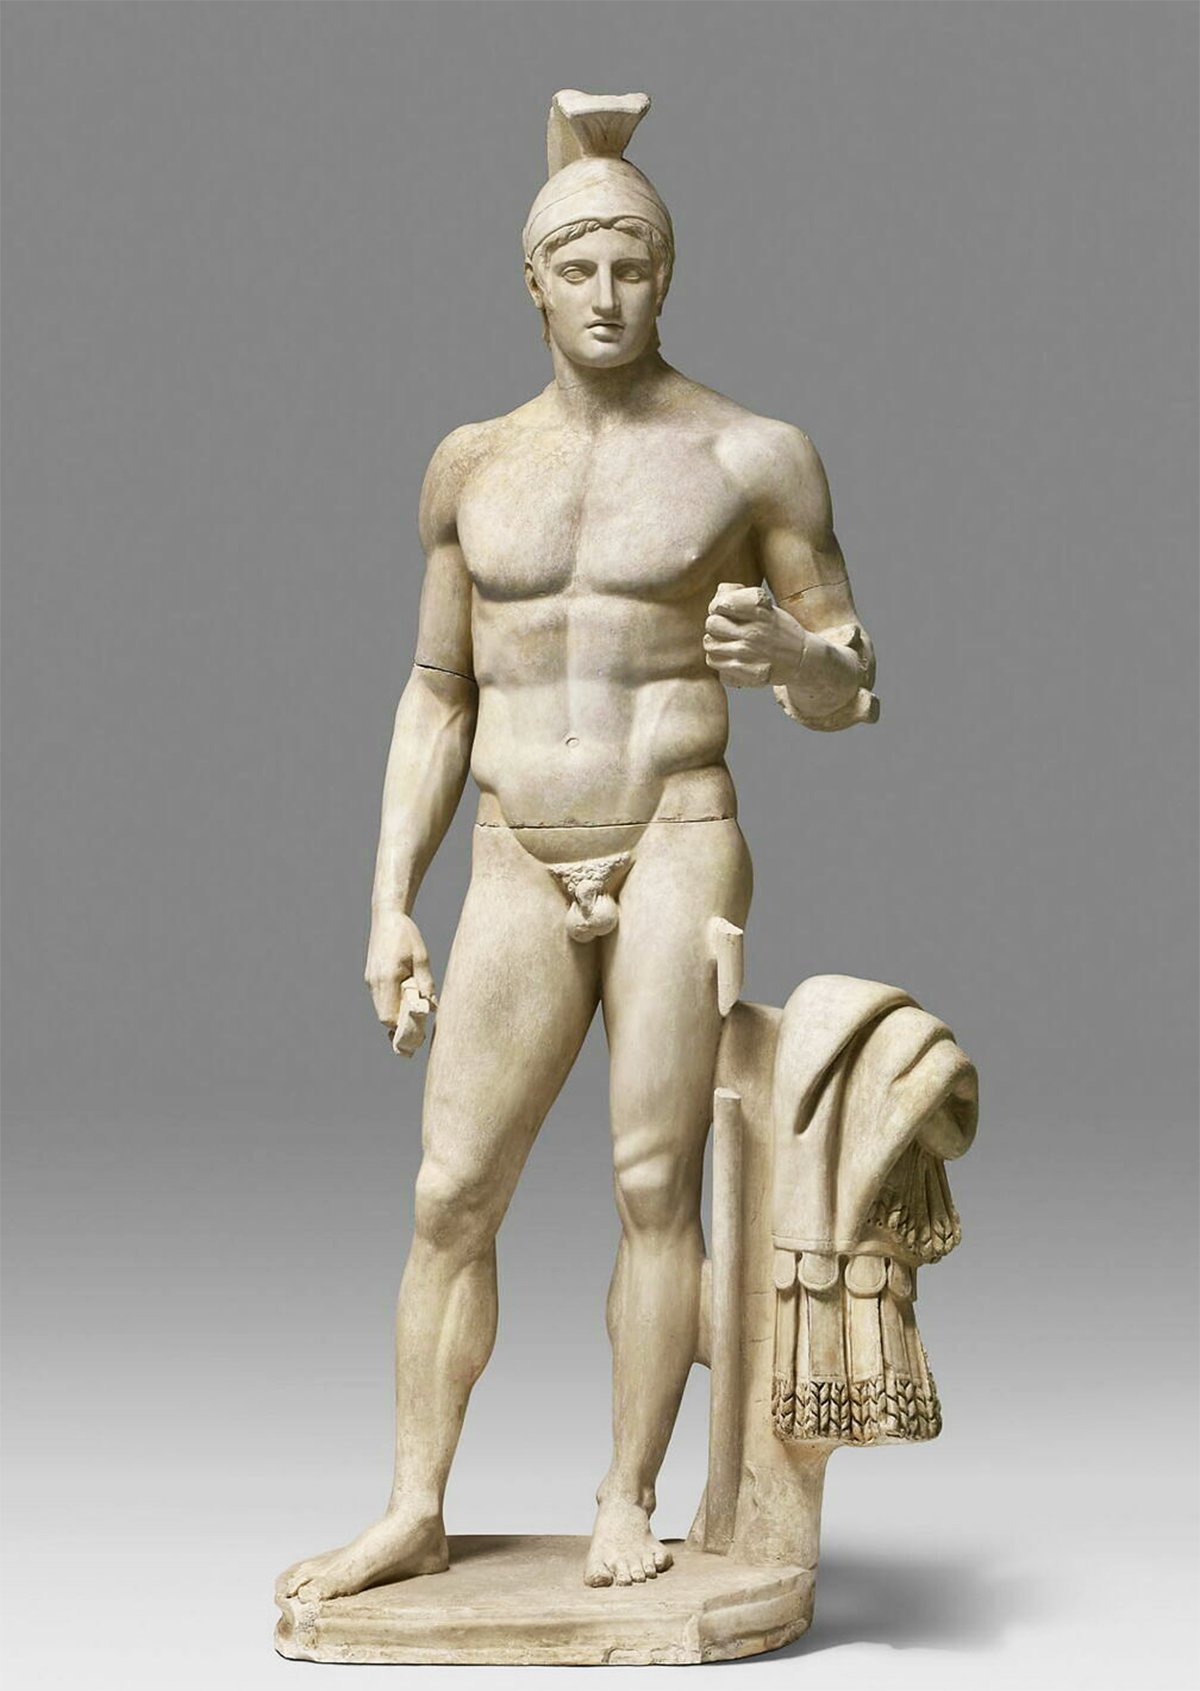 Classical statue depicting Ares, the Greek god of war, in a standing pose with a helmet and muscular physique. The statue is a Roman replica based on a 5th century BC Greek original.